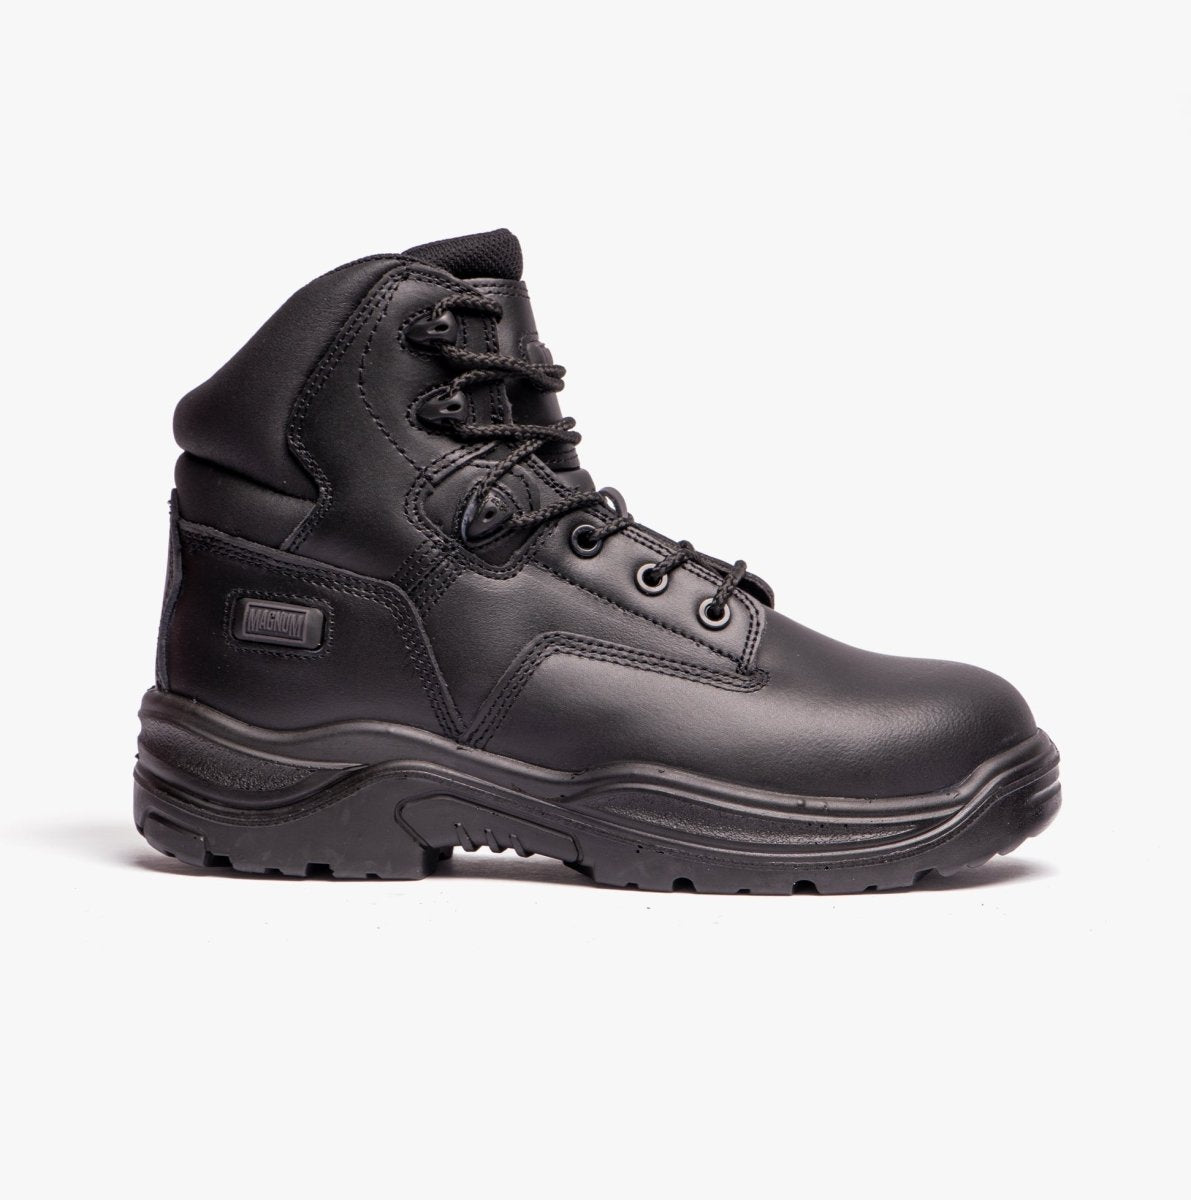 Magnum PRECISION SITEMASTER Unisex Adults Safety Boots Black 23421 - 38423 - 01 | STB.co.uk